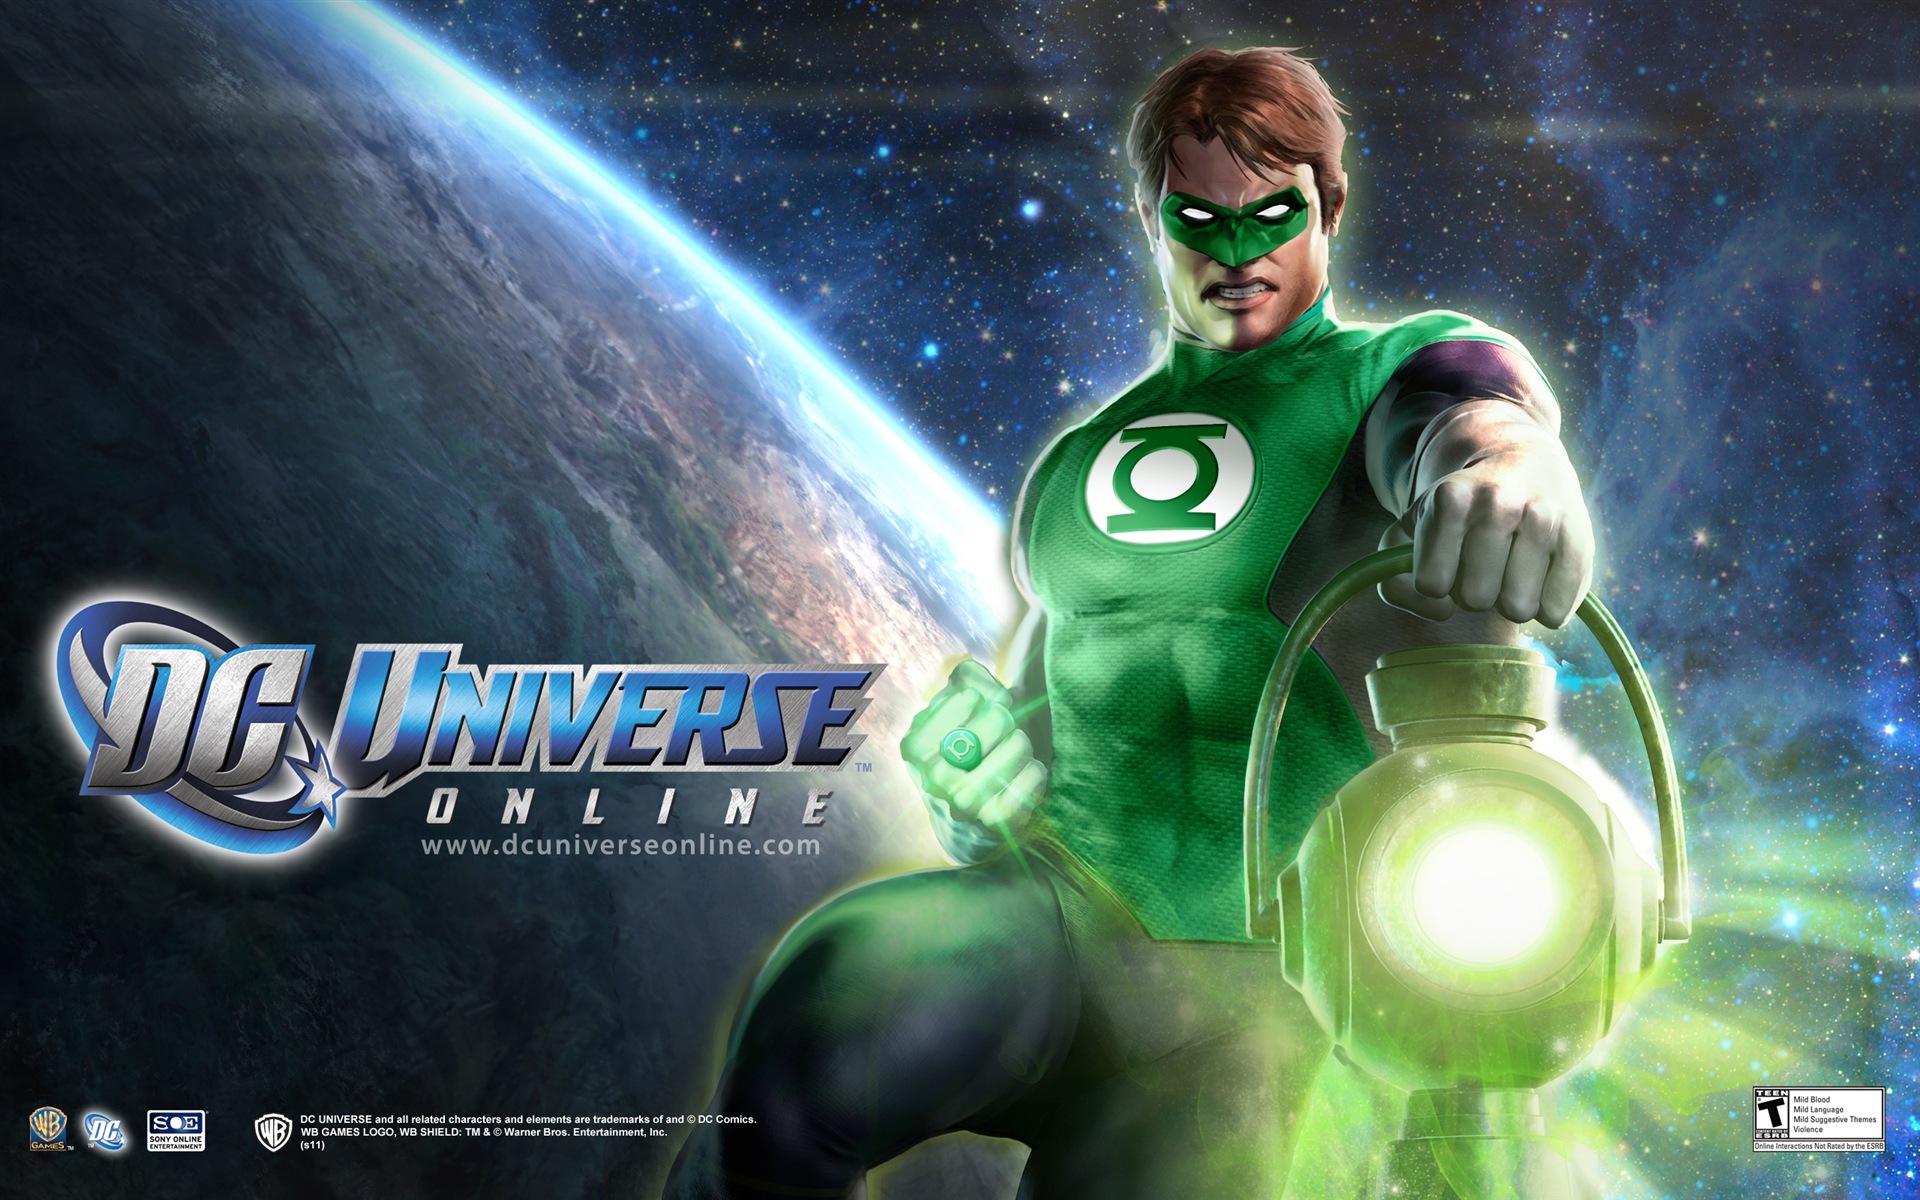 DC Universe Online HD game wallpapers #17 - 1920x1200